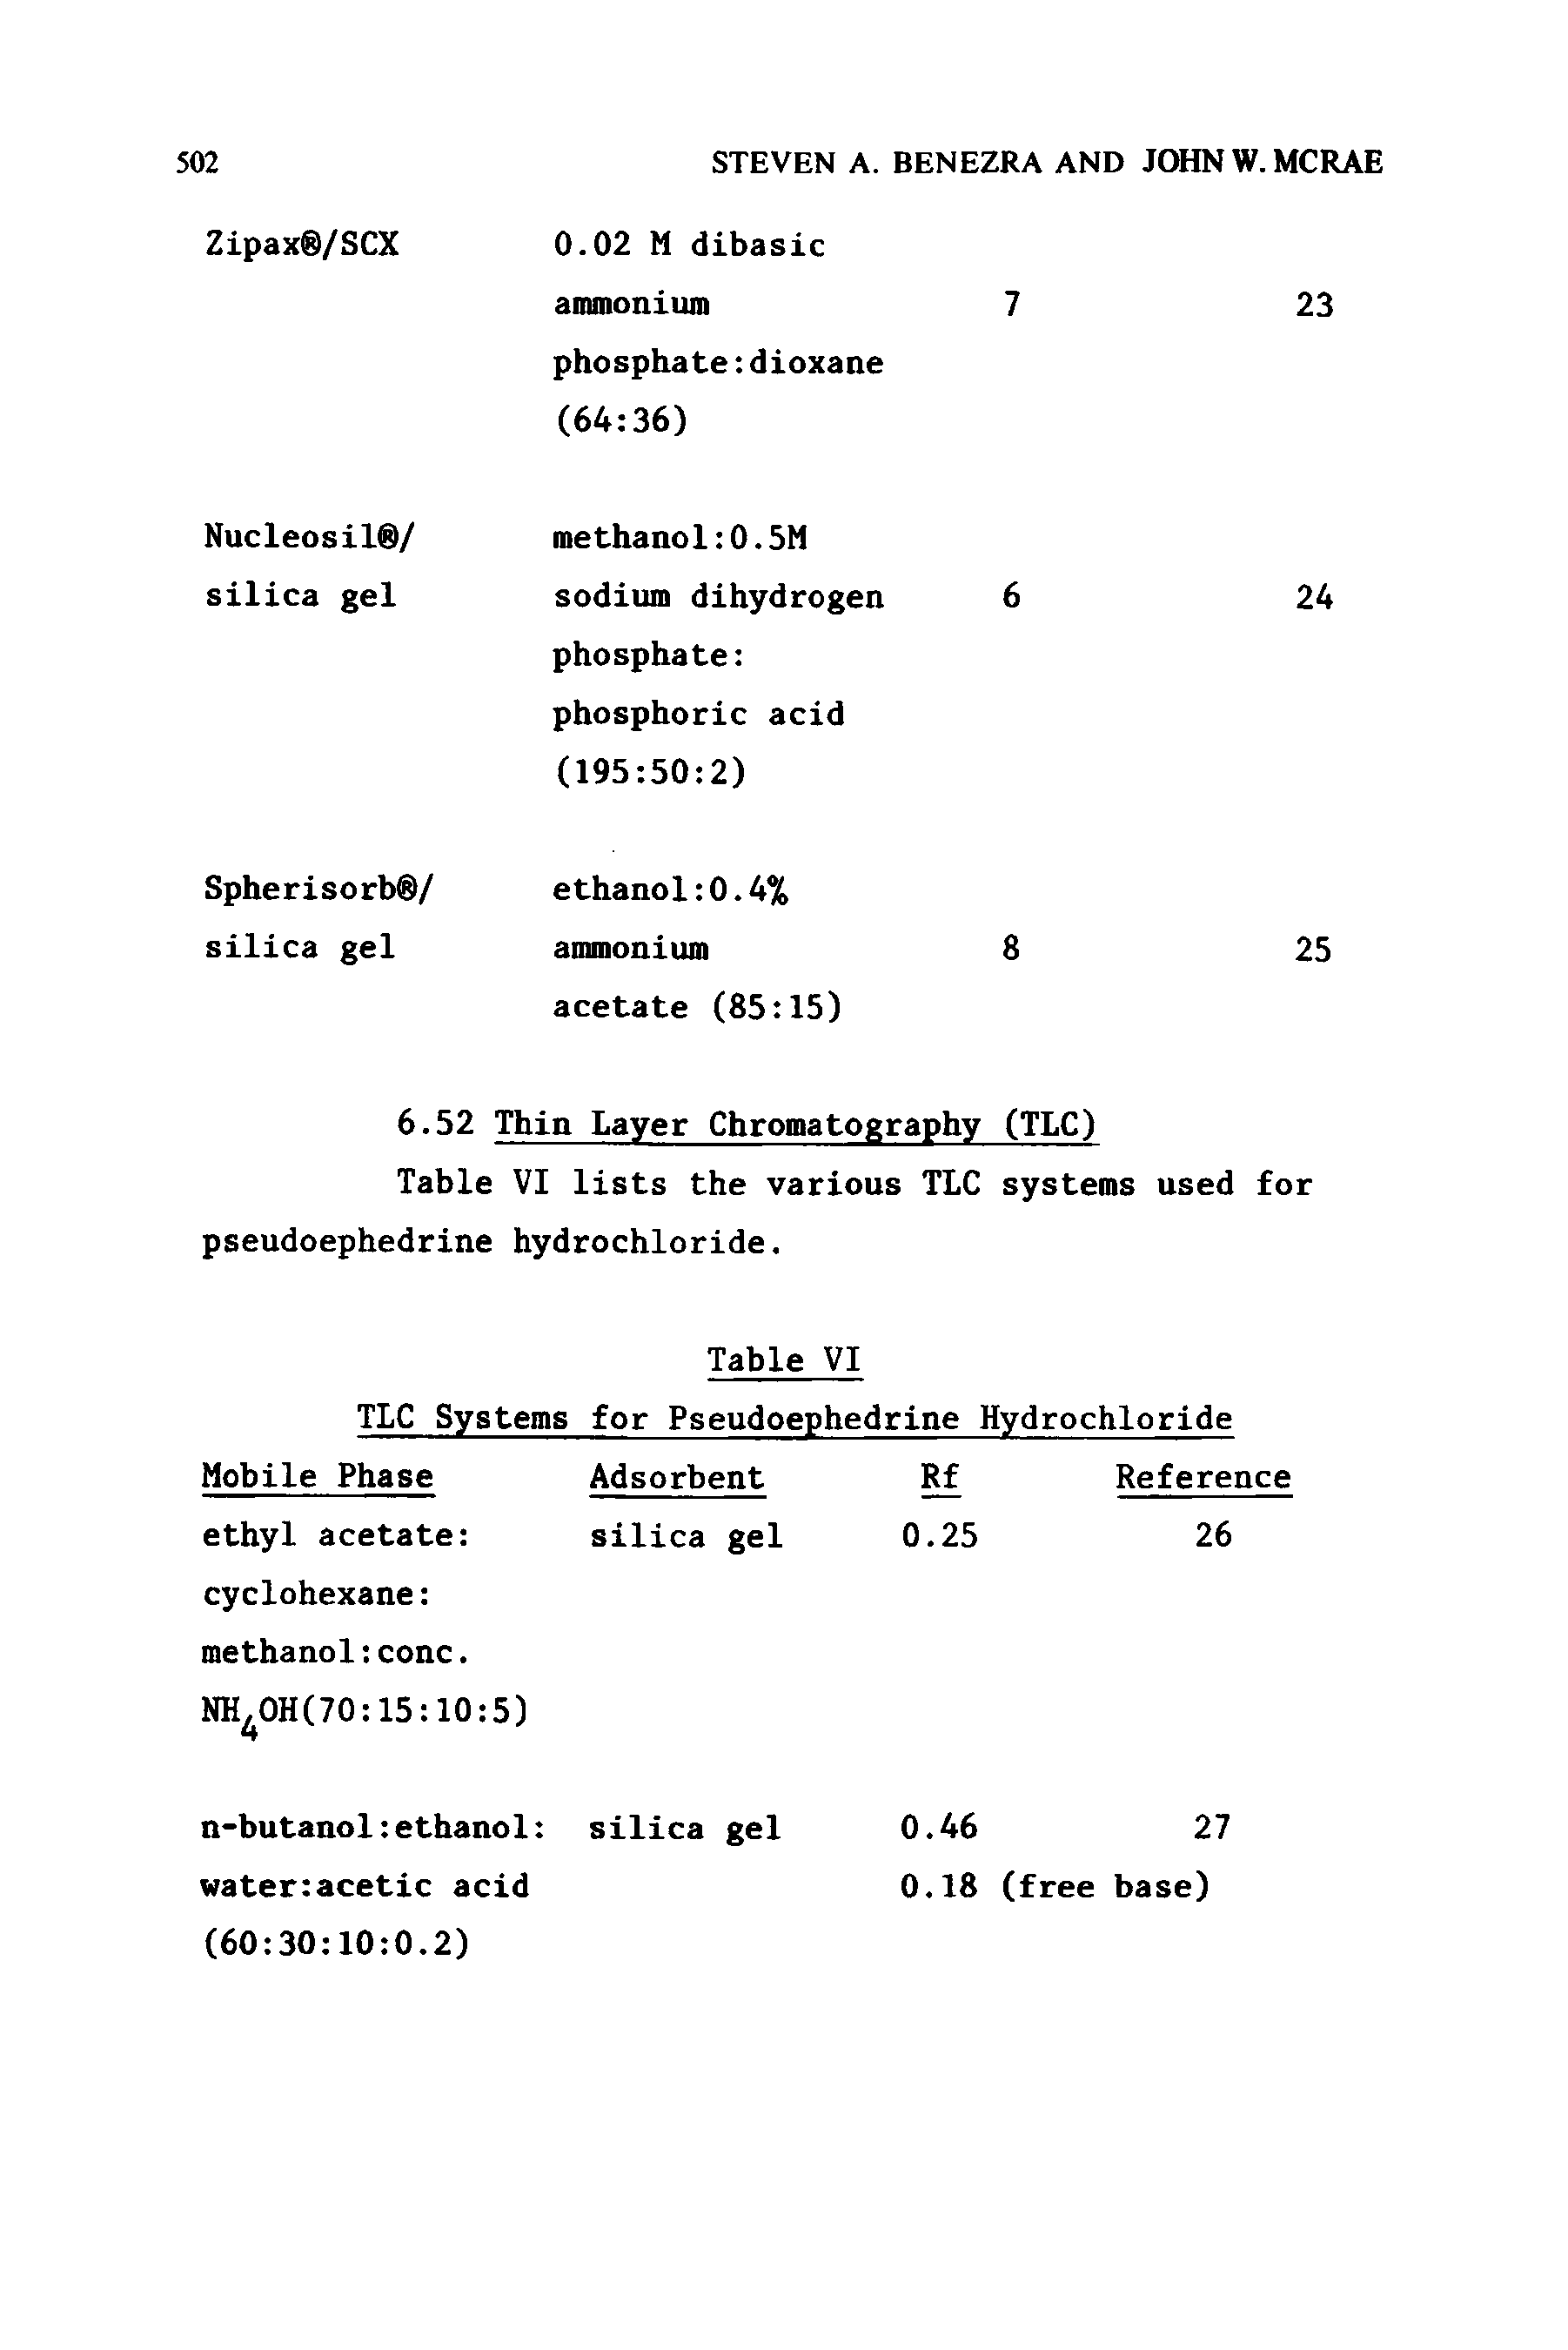 Table VI lists the various TLC systems used for pseudoephedrine hydrochloride.